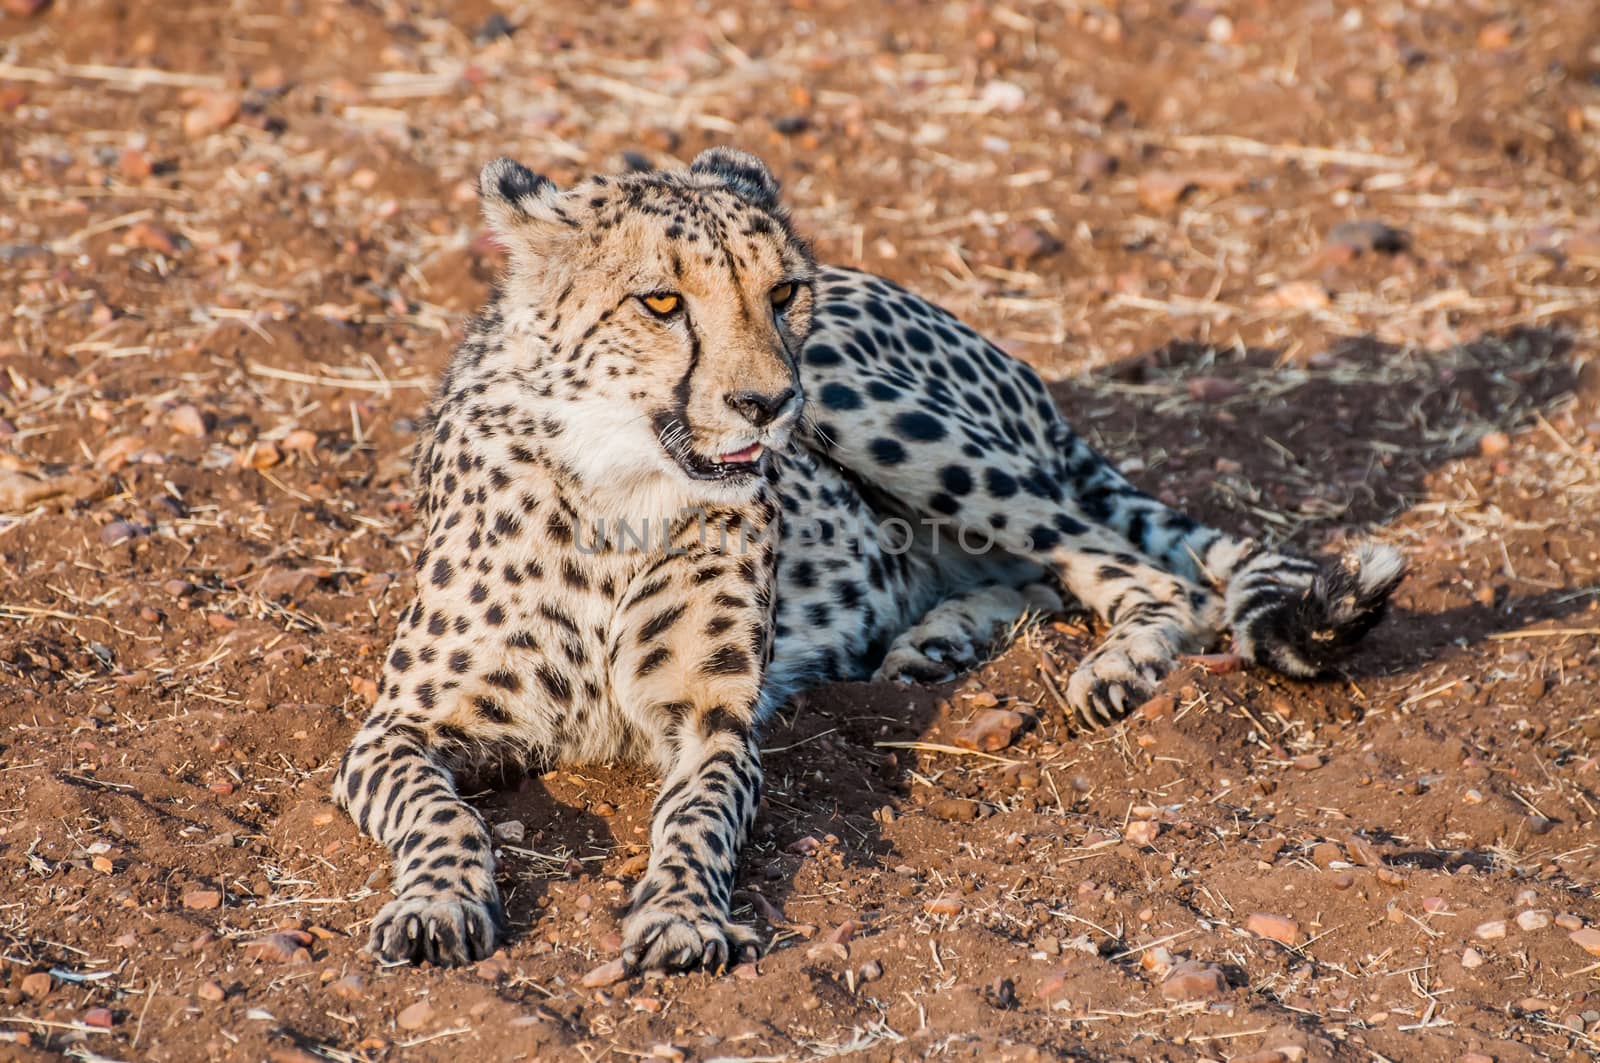 Cheetah lying in the sand by JFJacobsz